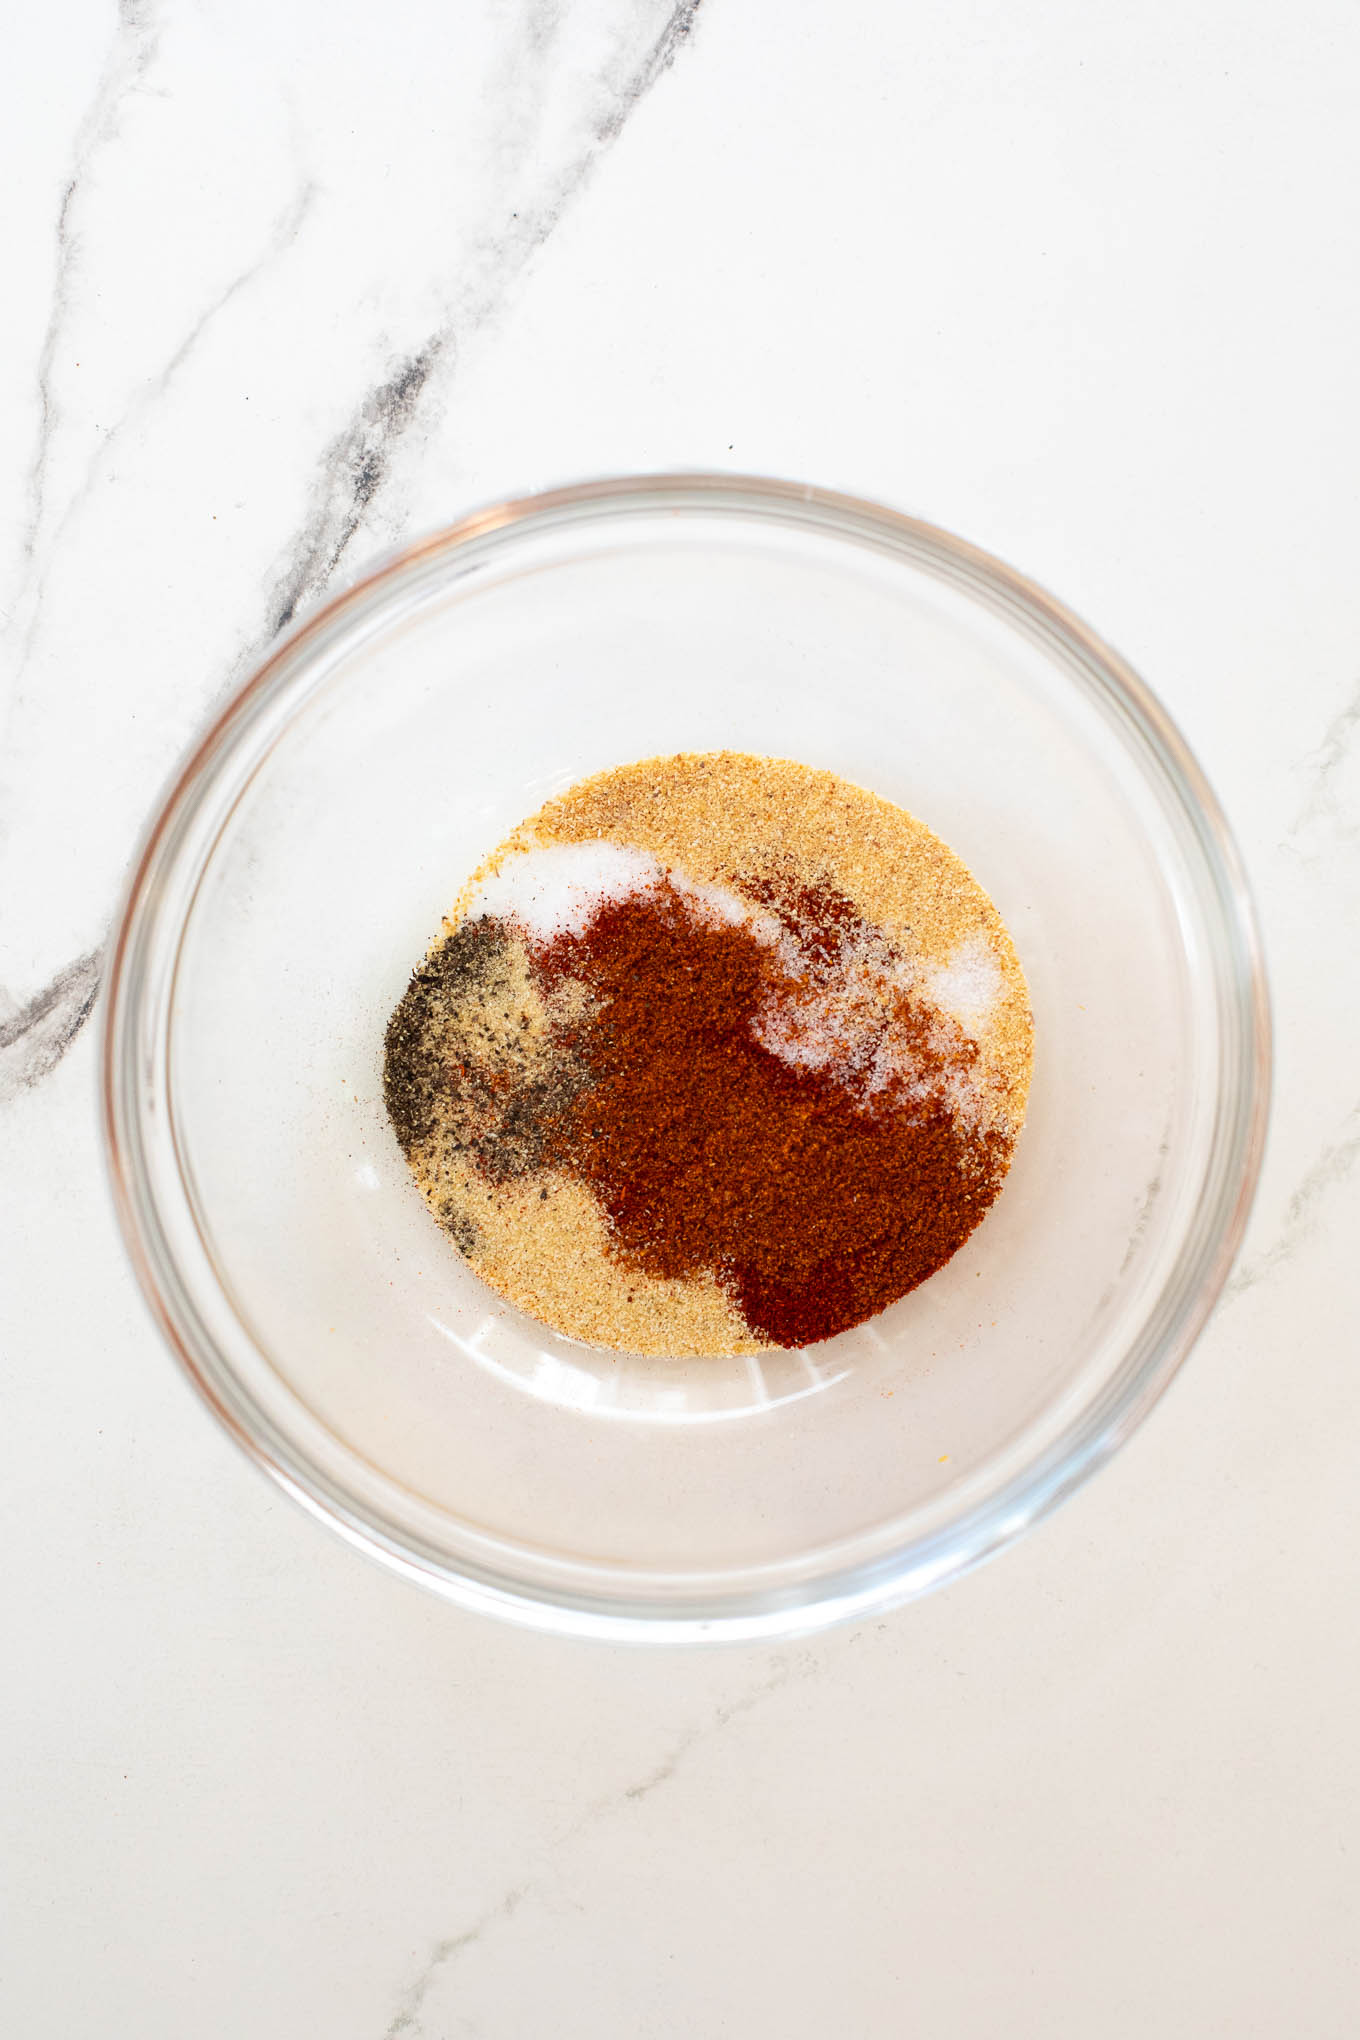 spice mixture in a glass bowl.